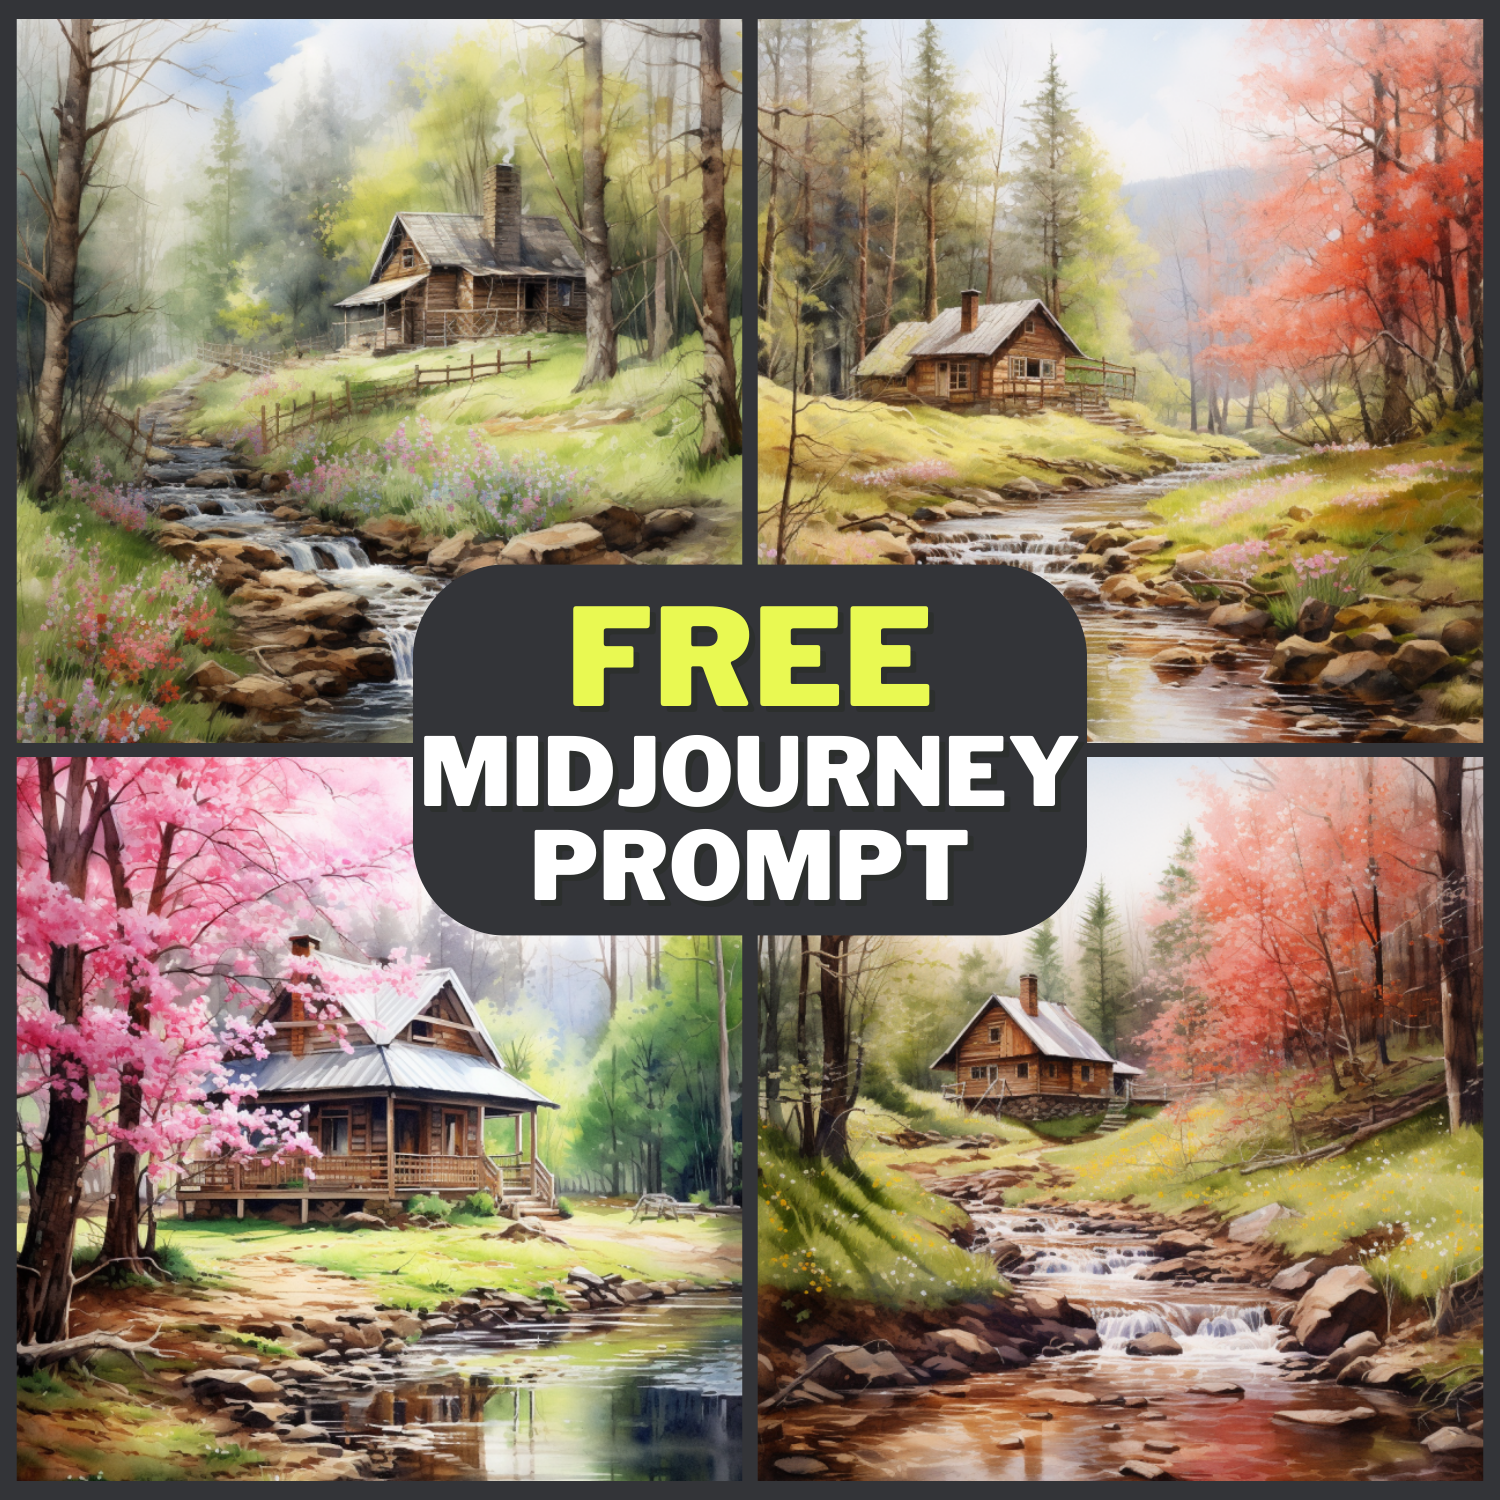 Woods Cabin Watercolor Painting Free Midjourney Prompt 1